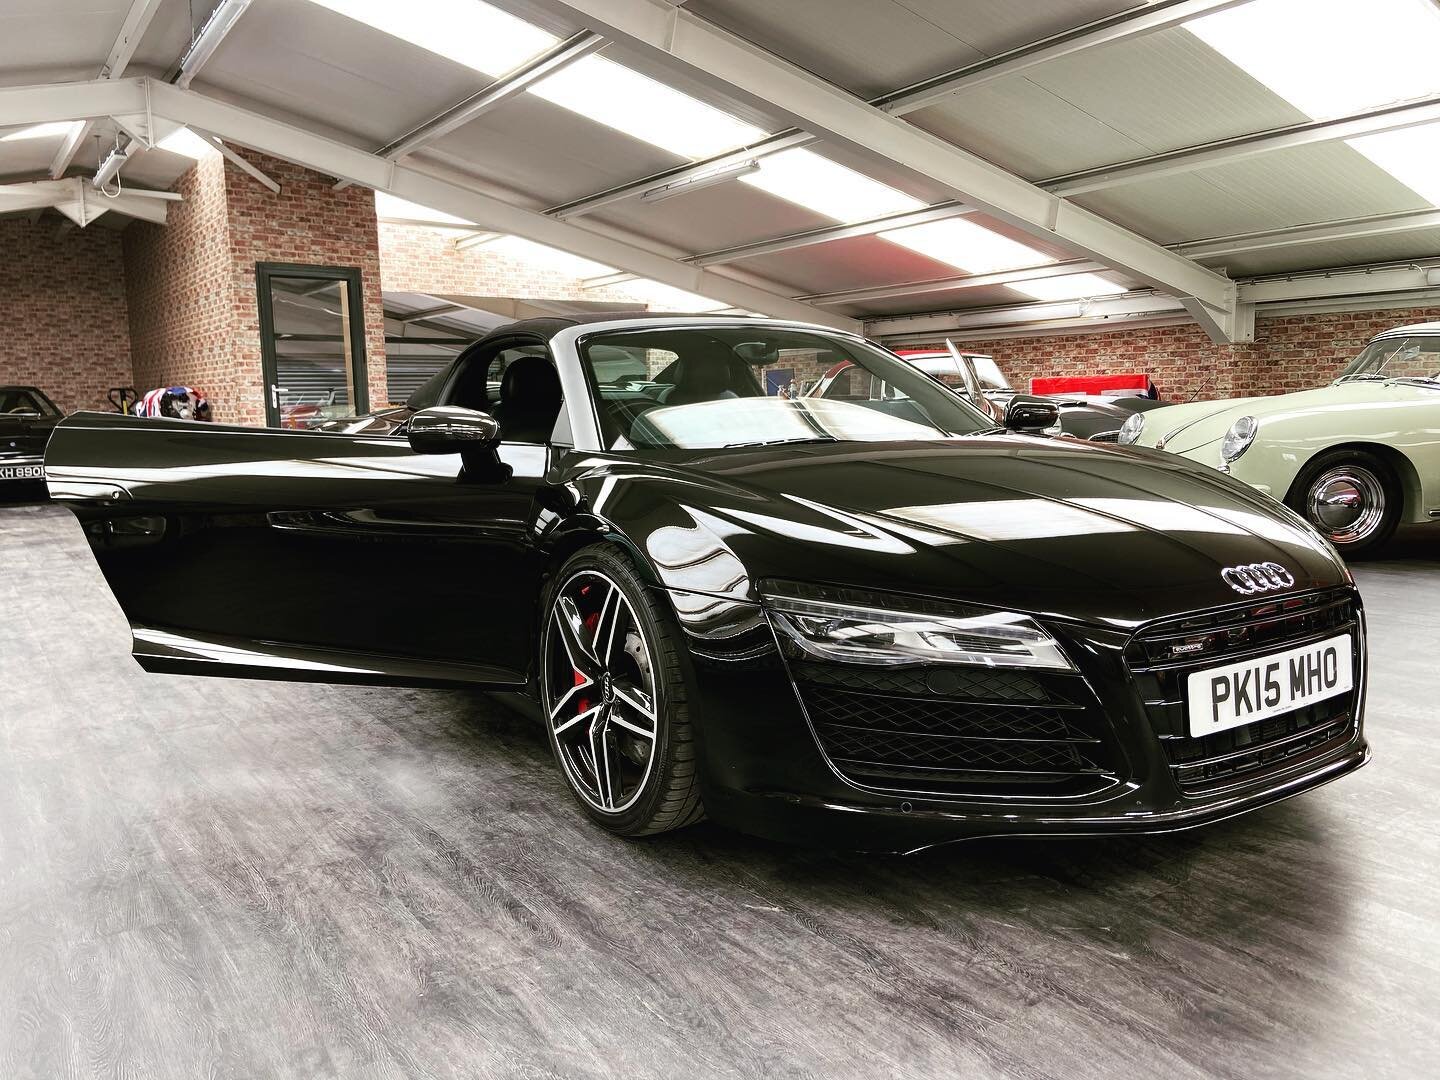 For sale. Audi r8 convertible. 2015. 26k mileage.With carbon extras. &pound;55.000 @cult_classics_london #audir8 #convertible #nano #waxed #carbonfiber #v10 #blackcar #forsale #futureclassic #shiny